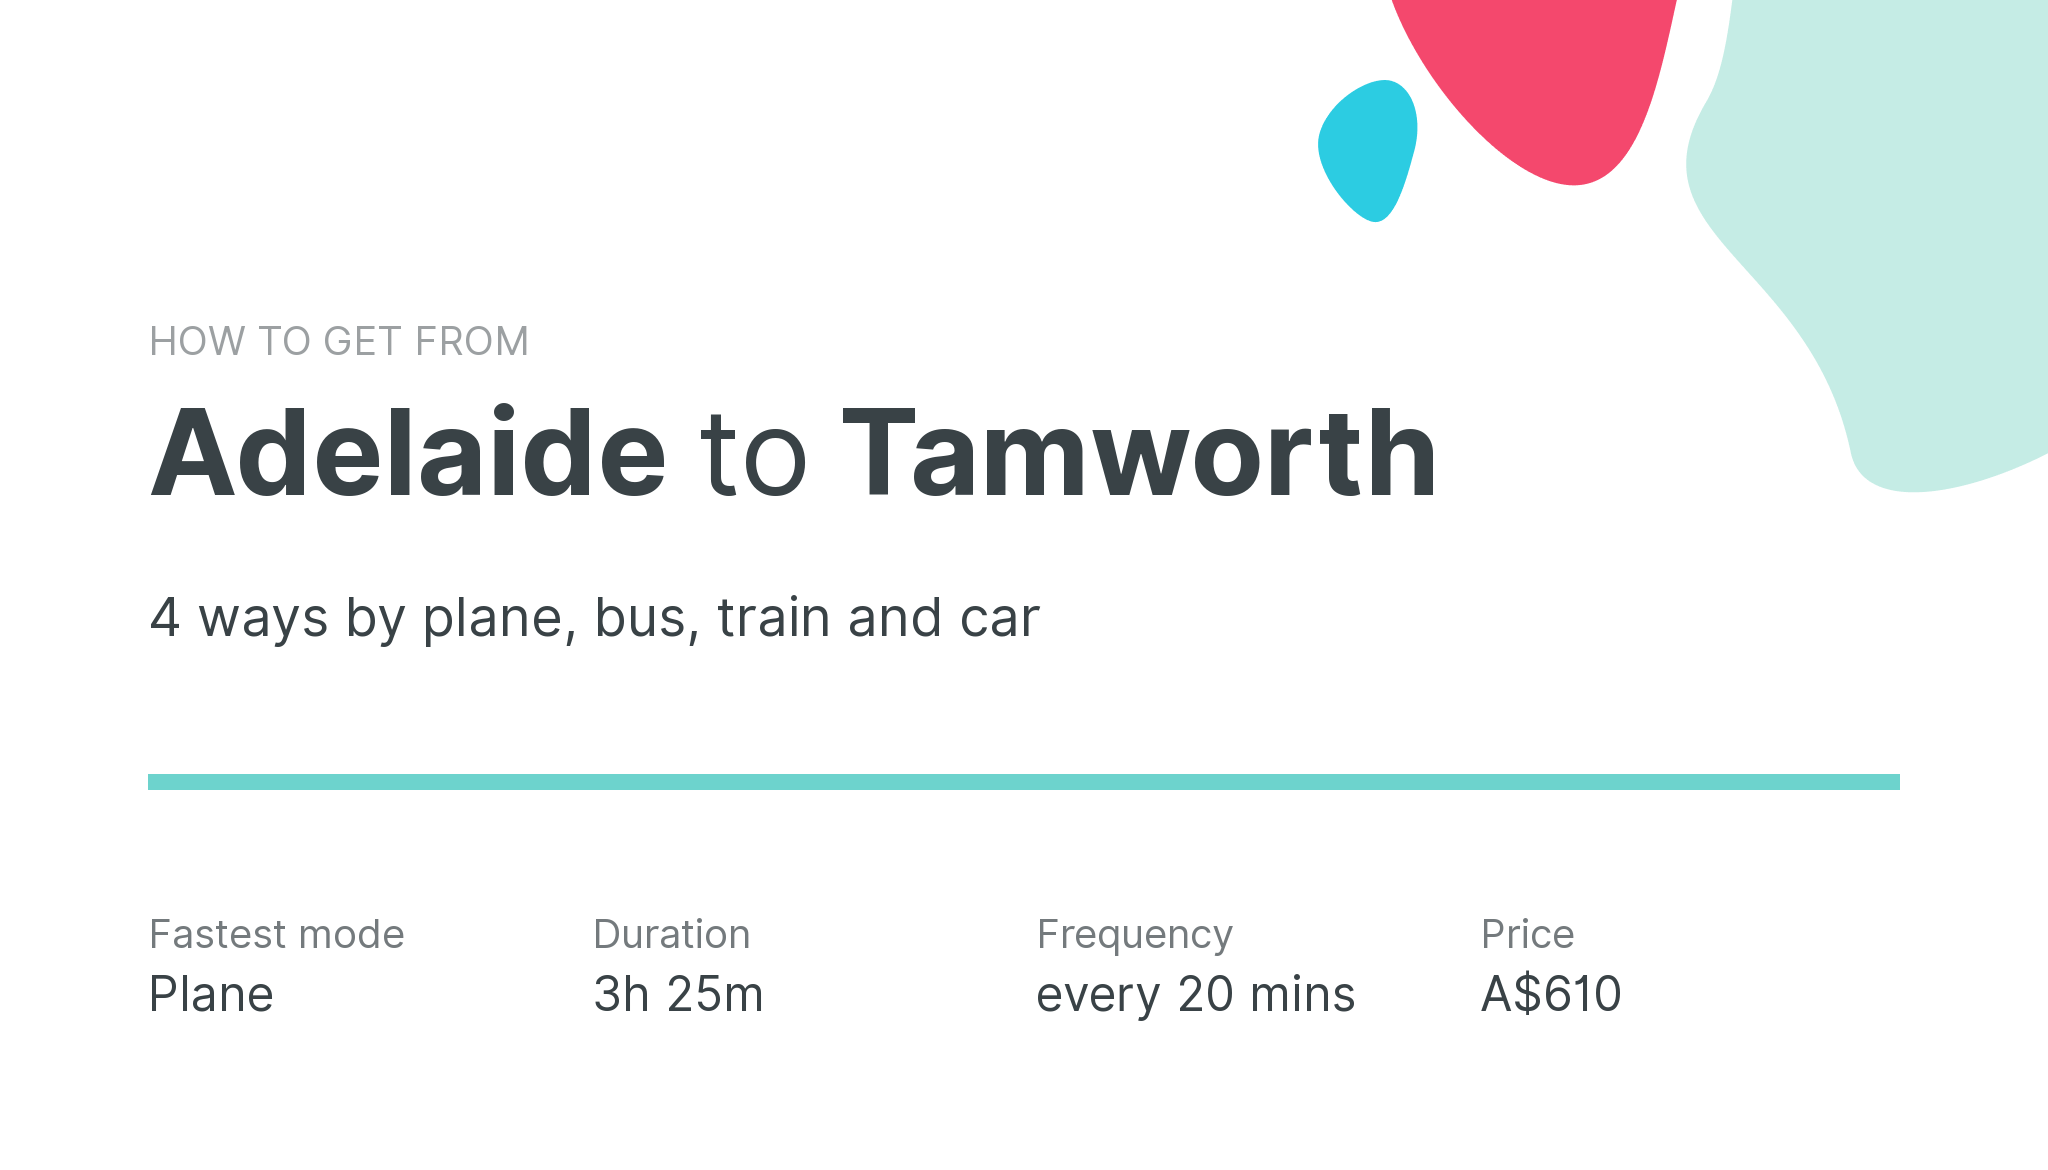 How do I get from Adelaide to Tamworth